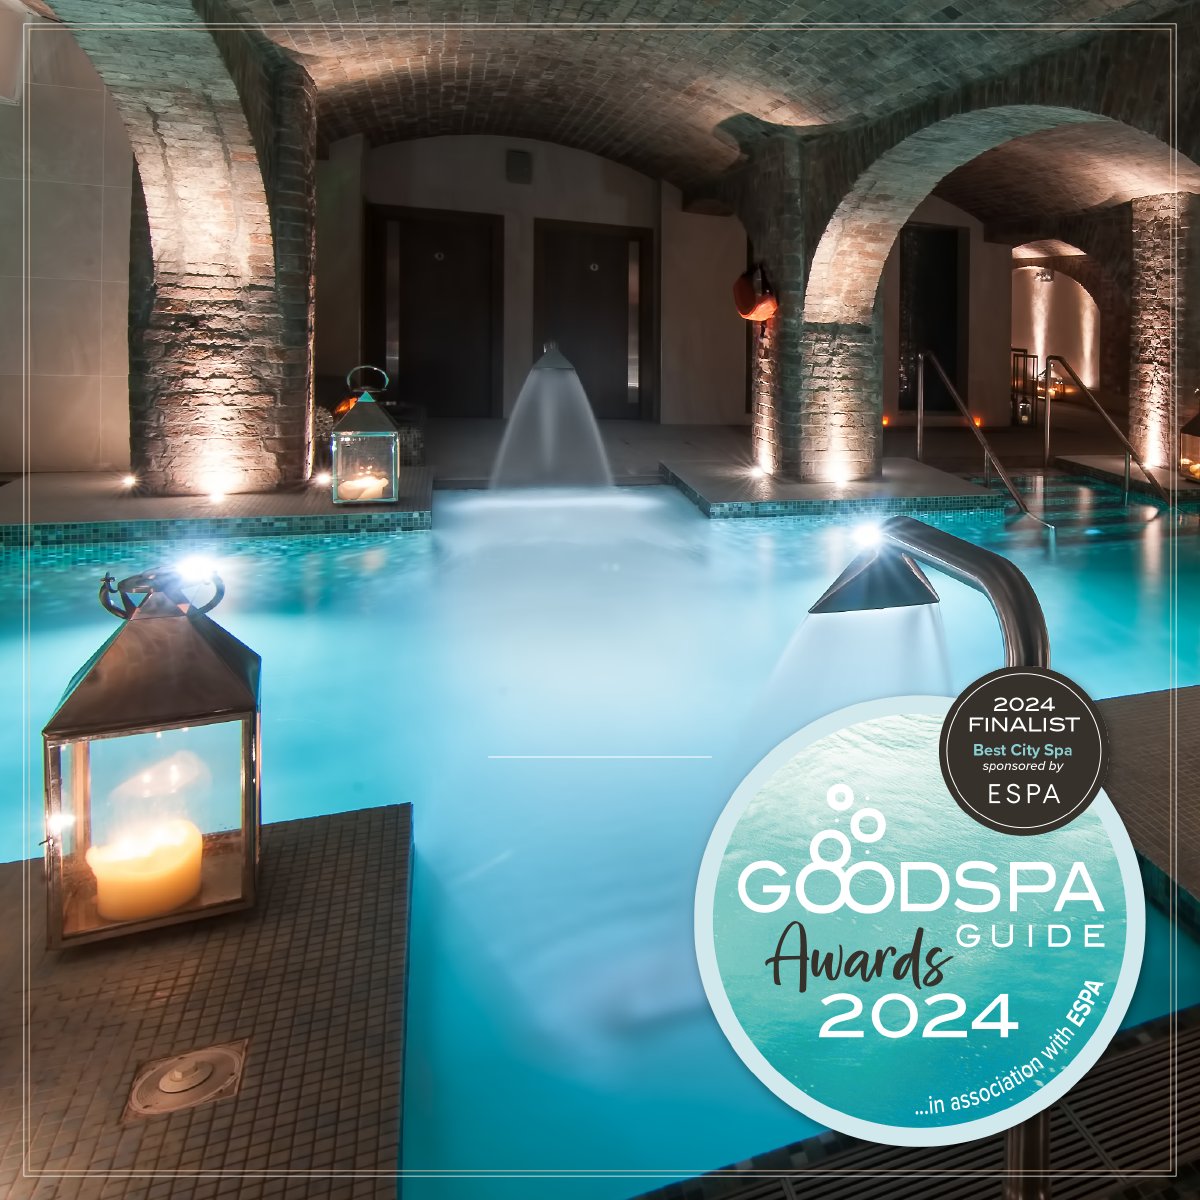 We are delighted to be shortlisted as a finalist in the @GoodSpaGuide Awards 2024 in the Best City Spa category! Voting opens next week on Wednesday 1st May on the Good Spa Guide website, ow.ly/tSJs50RmZFI, so don’t forget to vote for us 😉